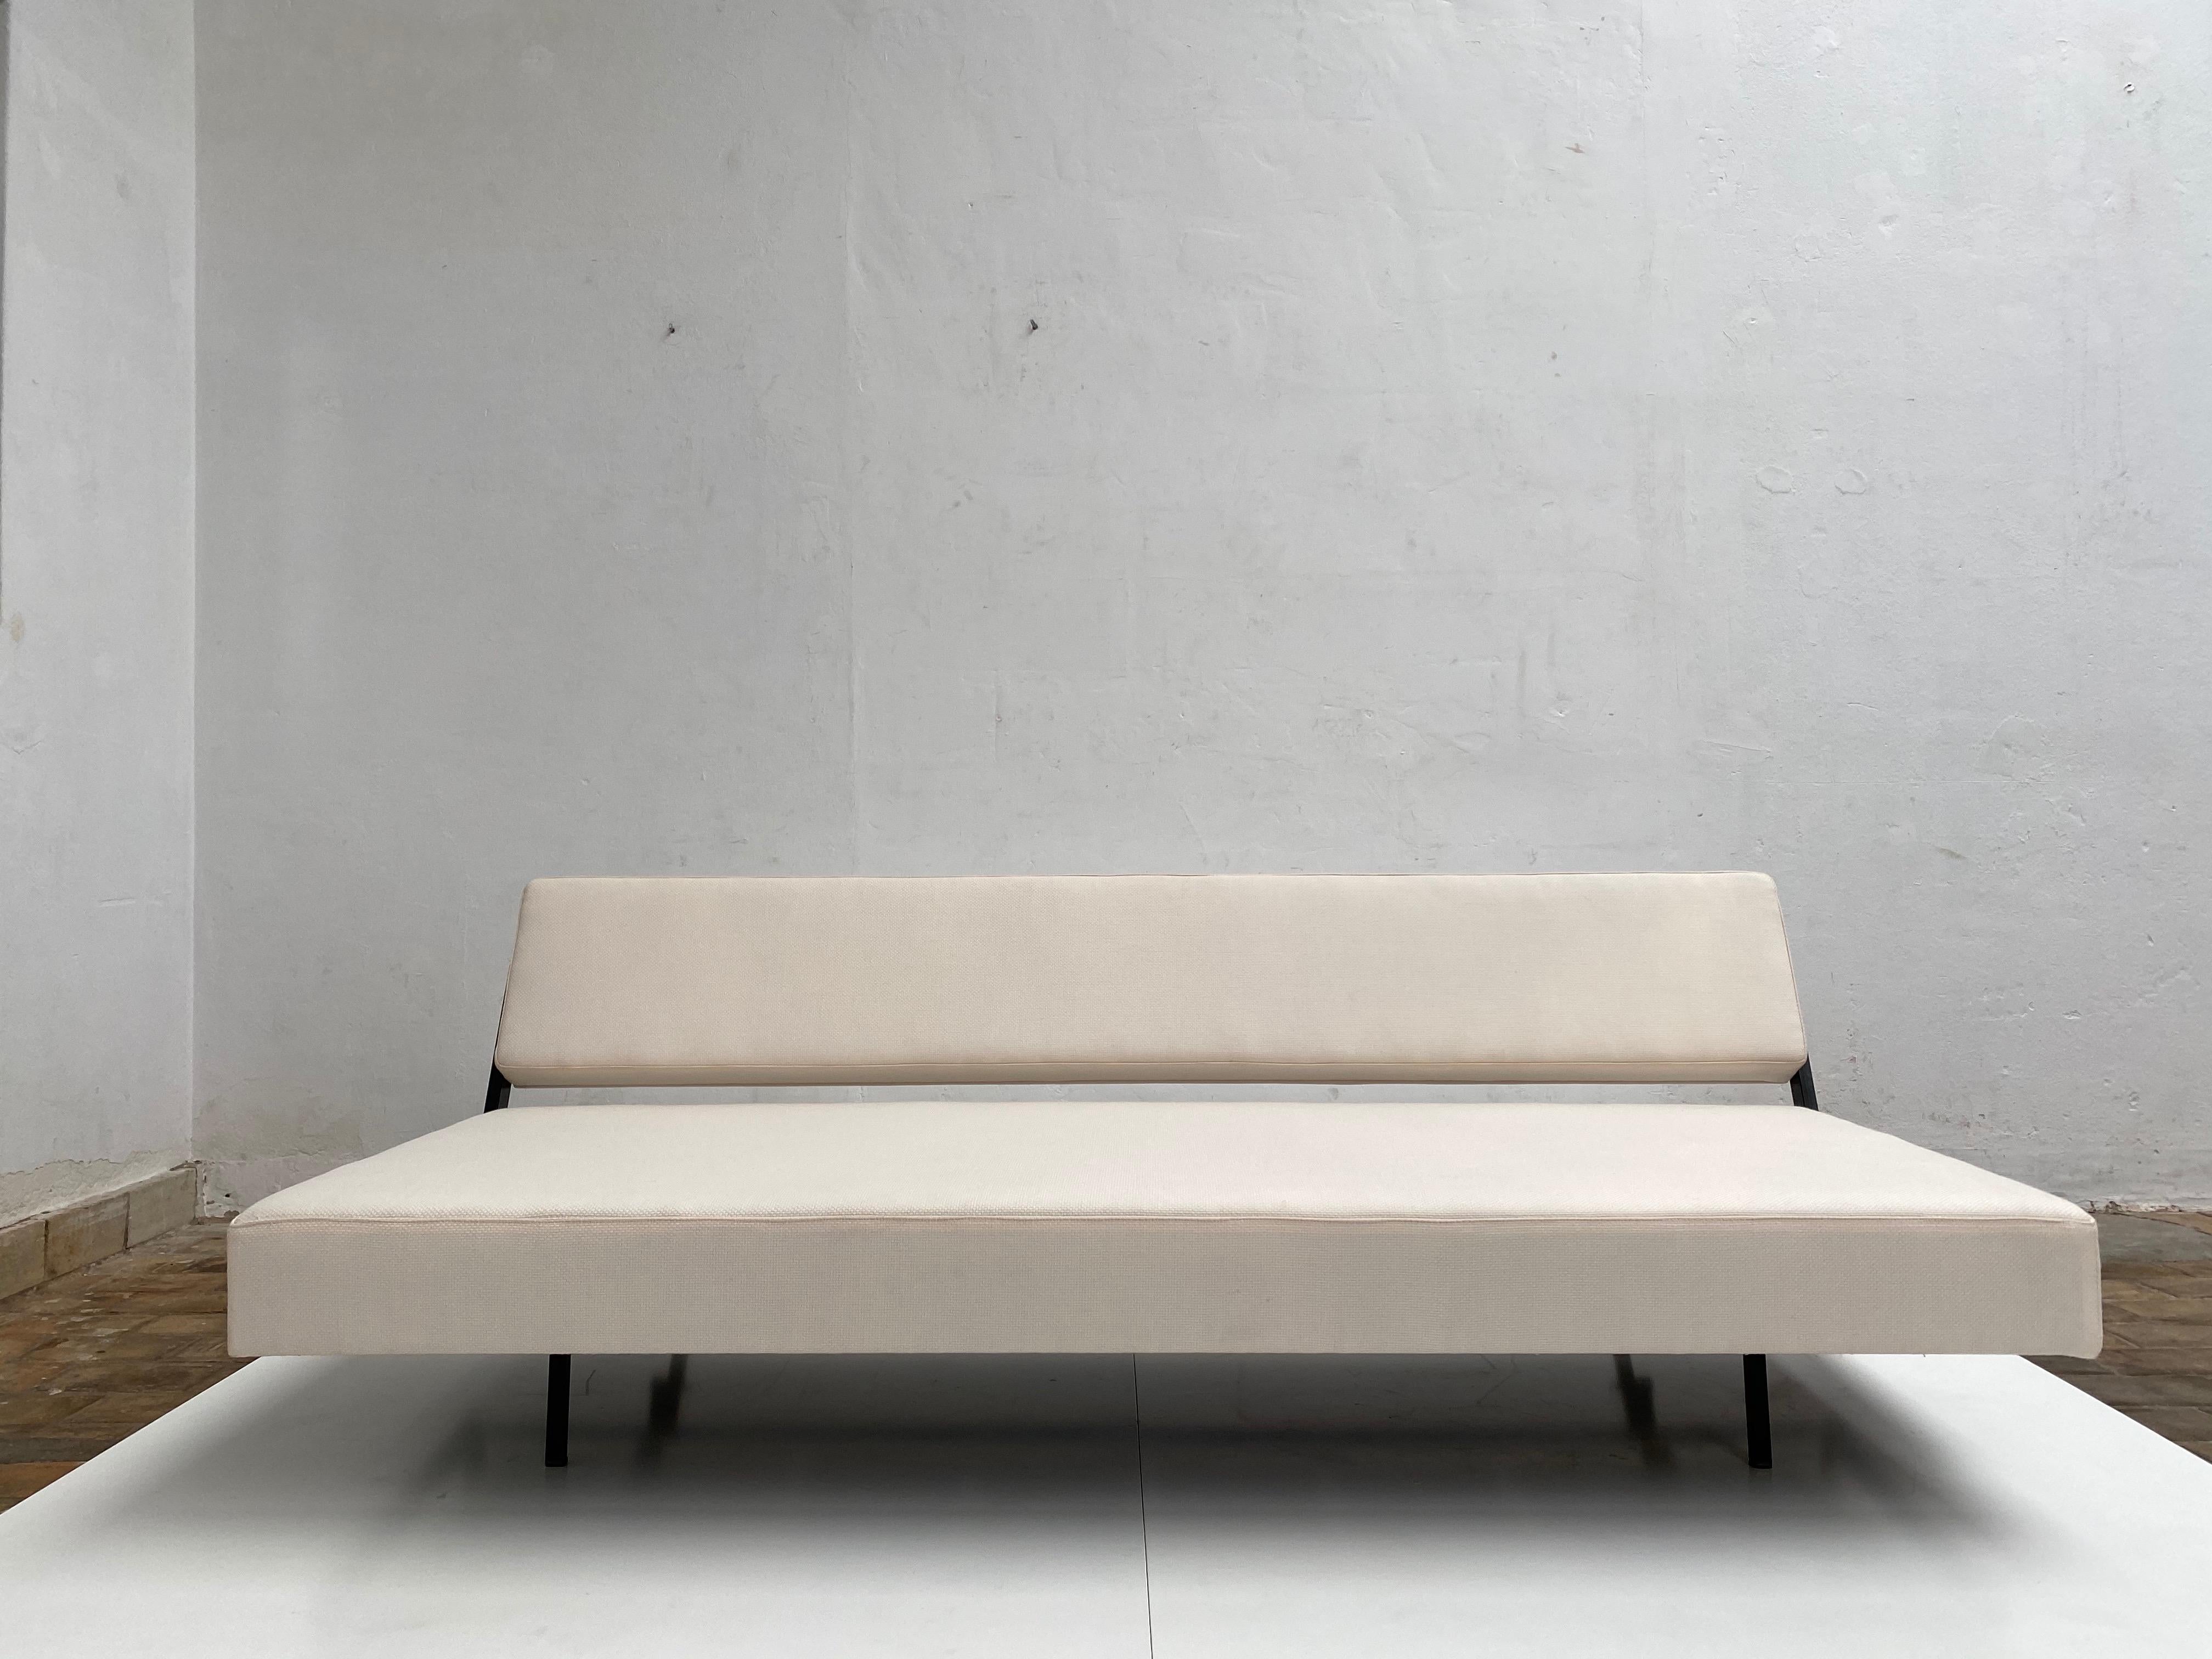 Dutch Space Saving Sleeping Sofa Minimal Design 1950s, Auping, the Netherlands For Sale